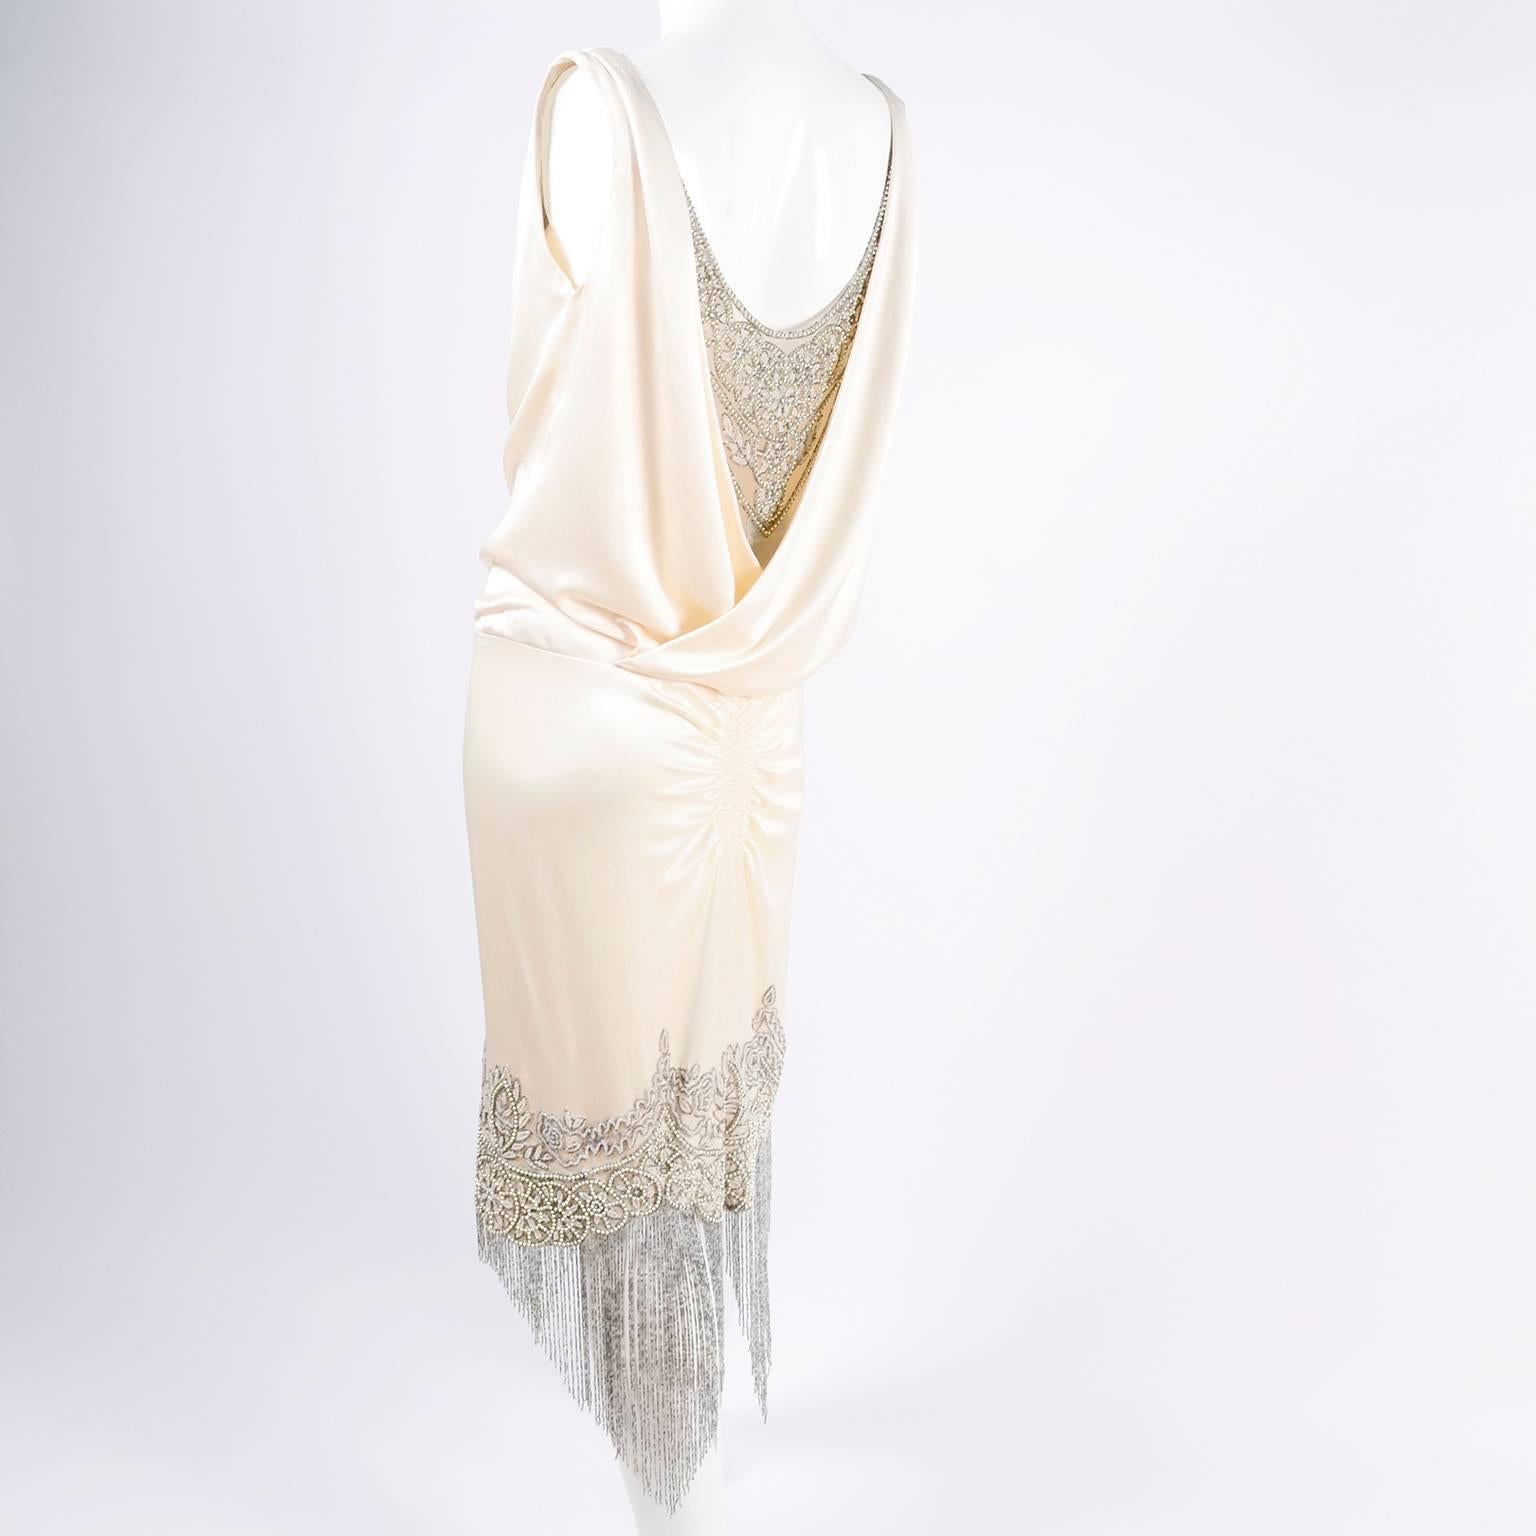 This is an exquisite creamy ivory silk dress designed by Alexander McQueen with exceptional hand beading.  Marked 2007, the silk charmeuse drapes at the neckline over a nude tulle net underlayer that is embellished with bugle beads, rhinestones,